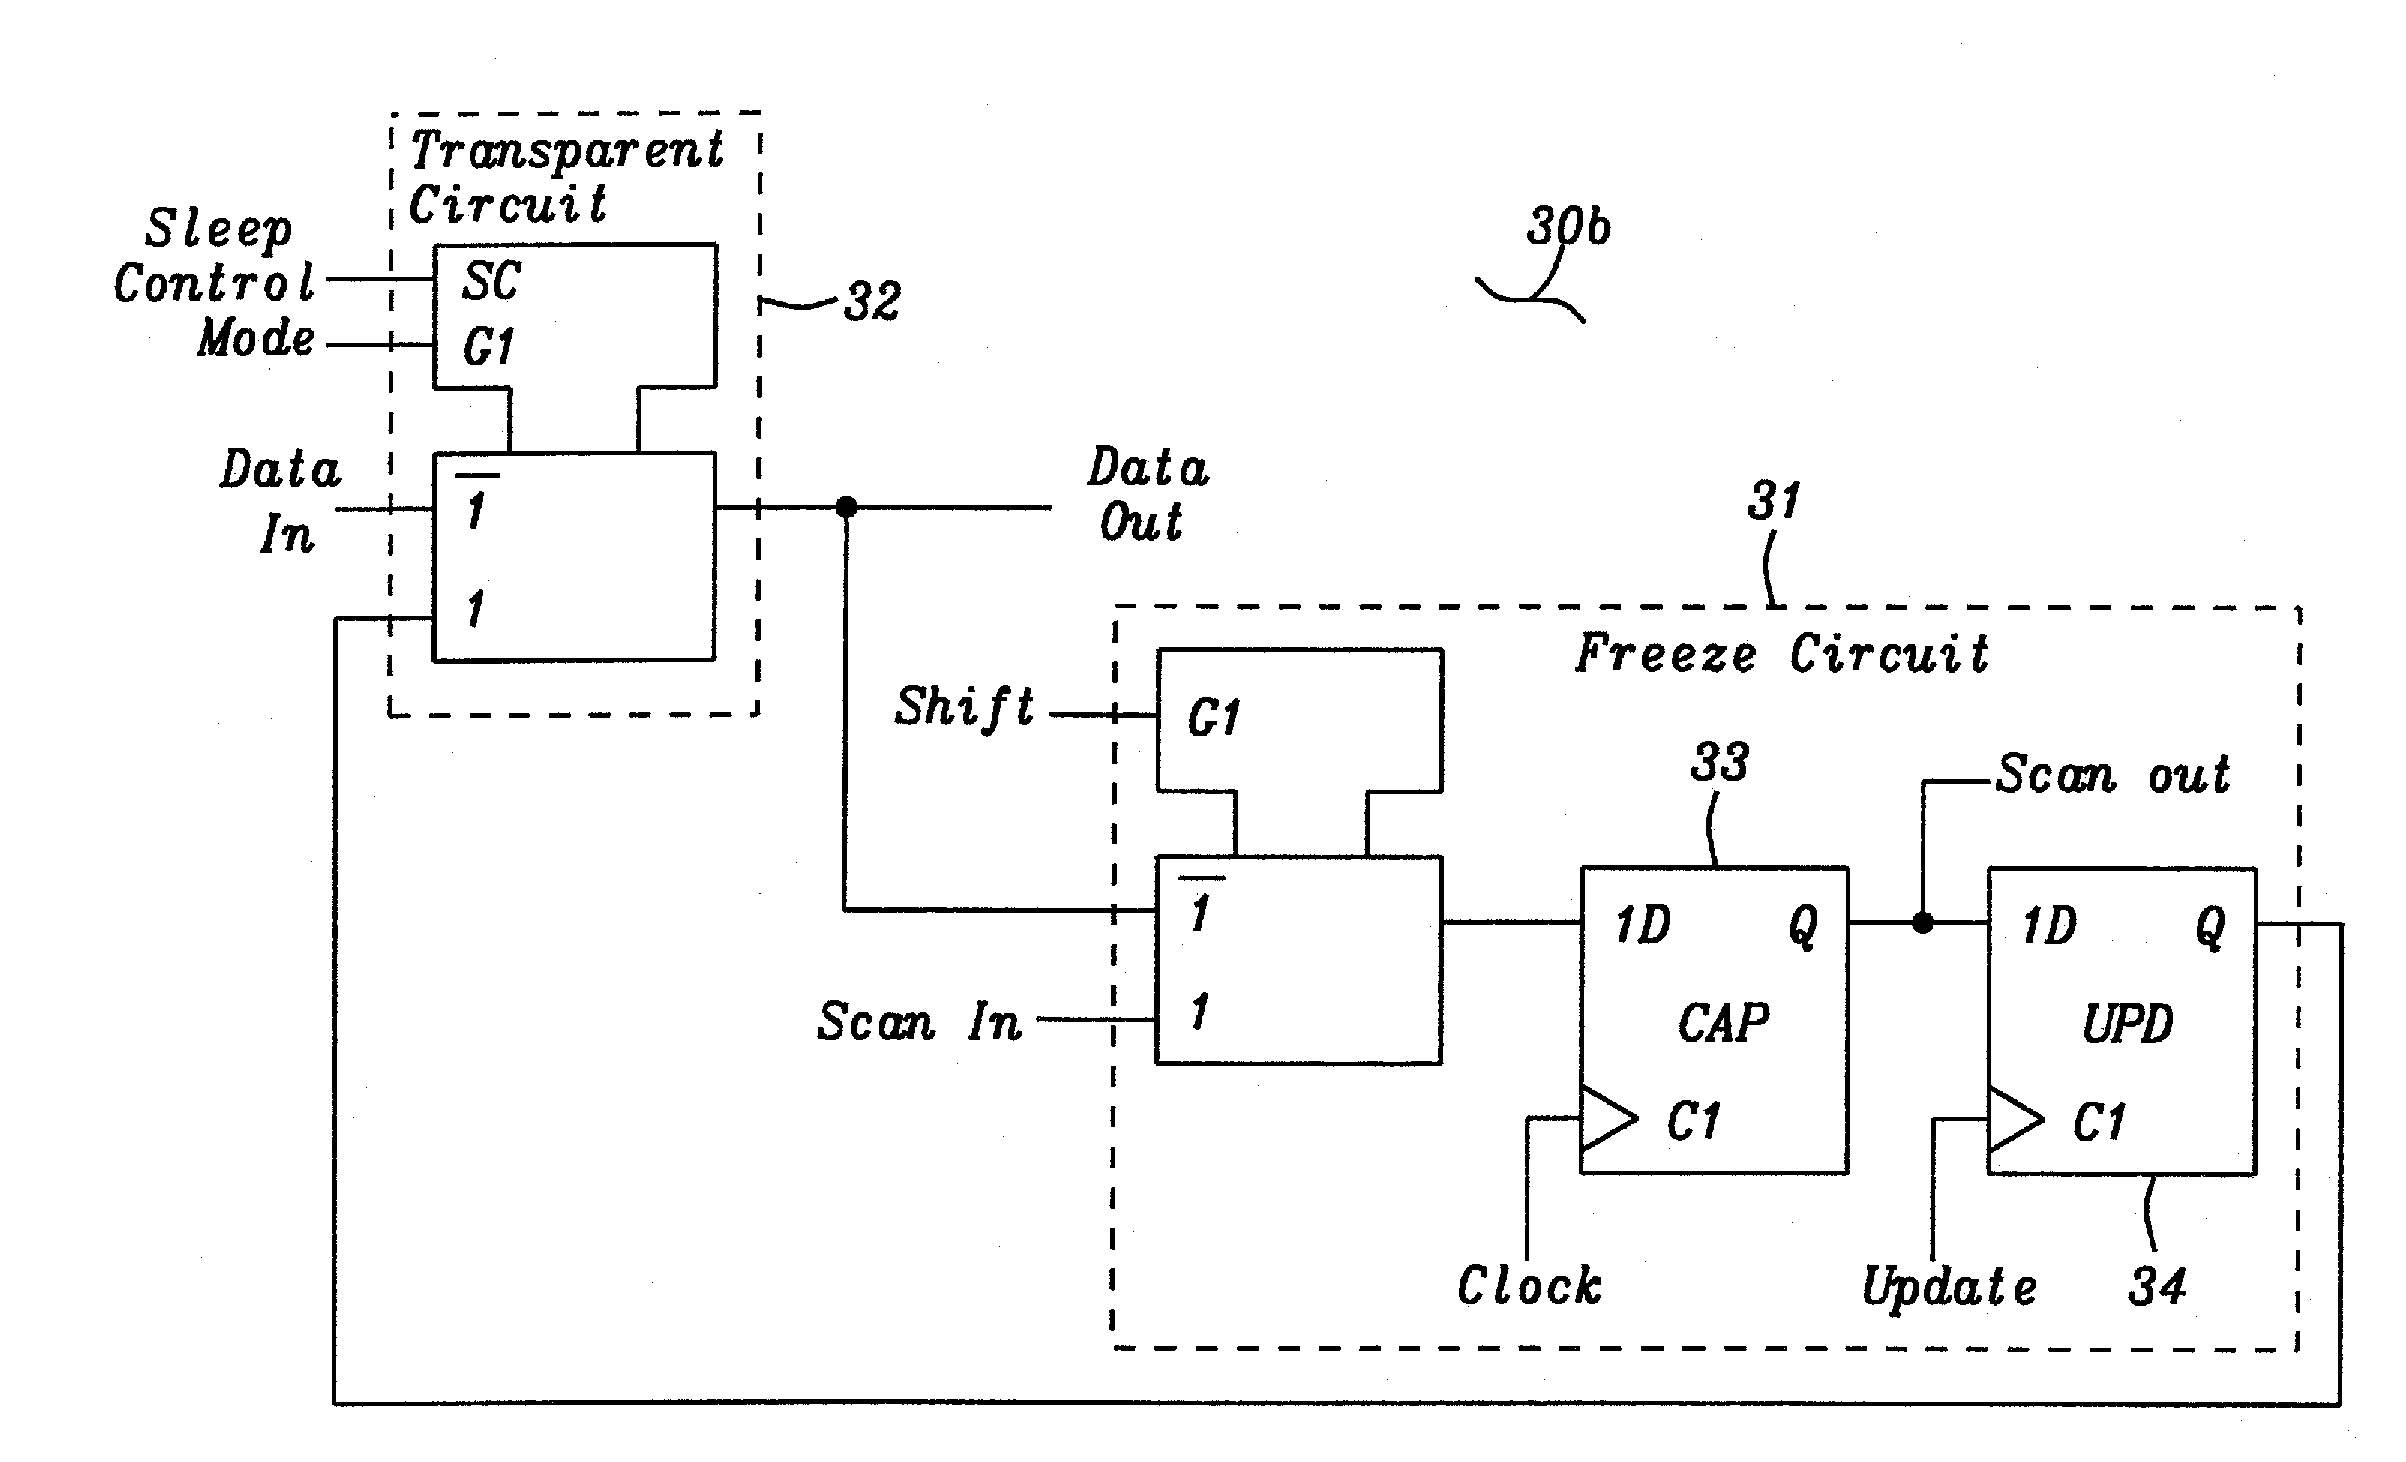 Low Leakage Boundary Scan Device Design and Implementation